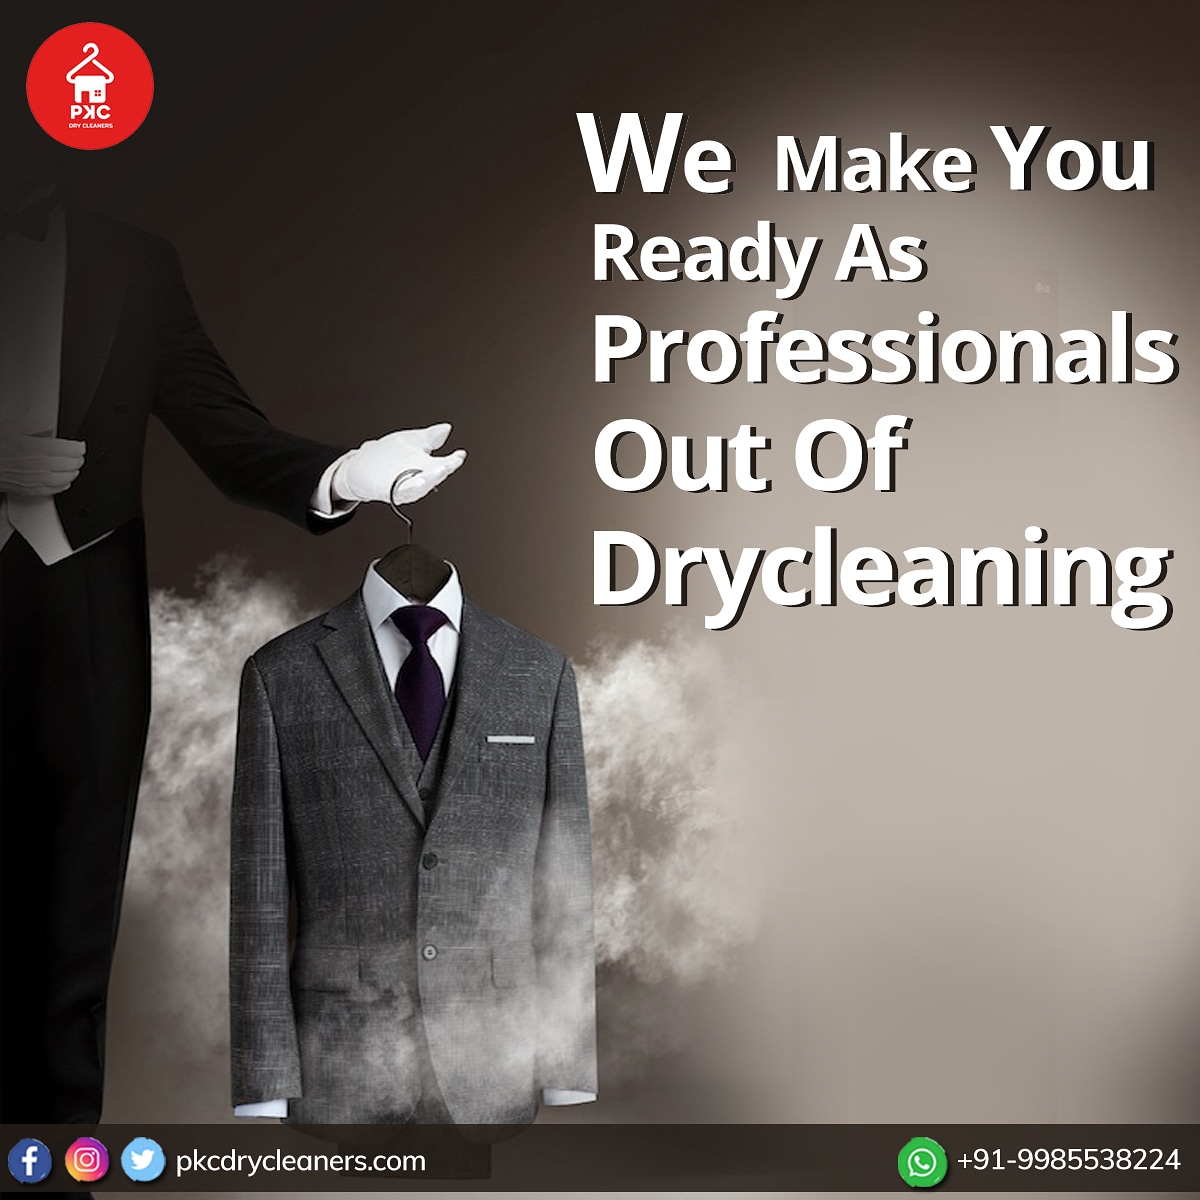 When you look good, we look good! Get the best dry cleaning service today. 
Call us now: 8886032214
WhatsApp: 9985538224
pkcdrycleaners.com
#drycleaningservice #hyderabadlaundry #freshclothes #steamiron #professional #laundryservices #laundromats #clothes #goodvibes